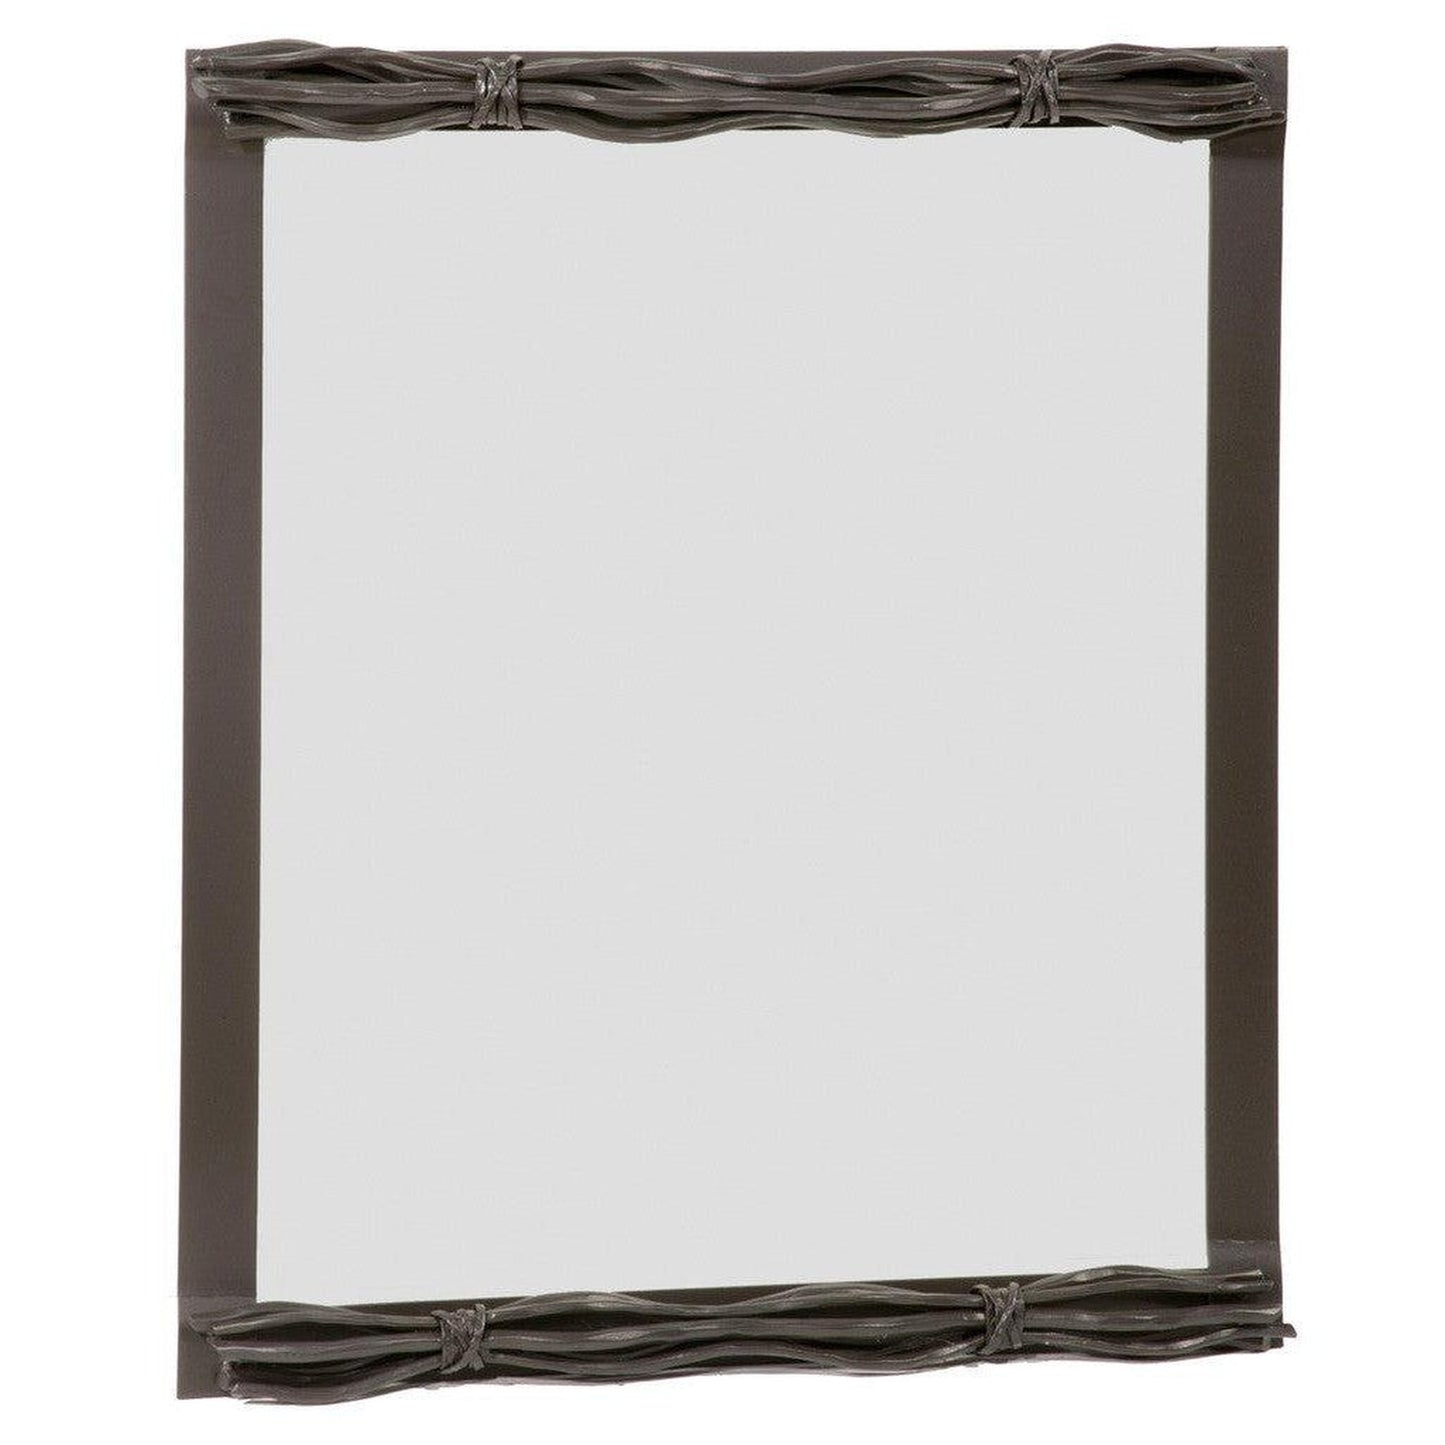 Stone County Ironworks Rush 21" x 26" Small Hand Rubbed Pewter Iron Wall Mirror